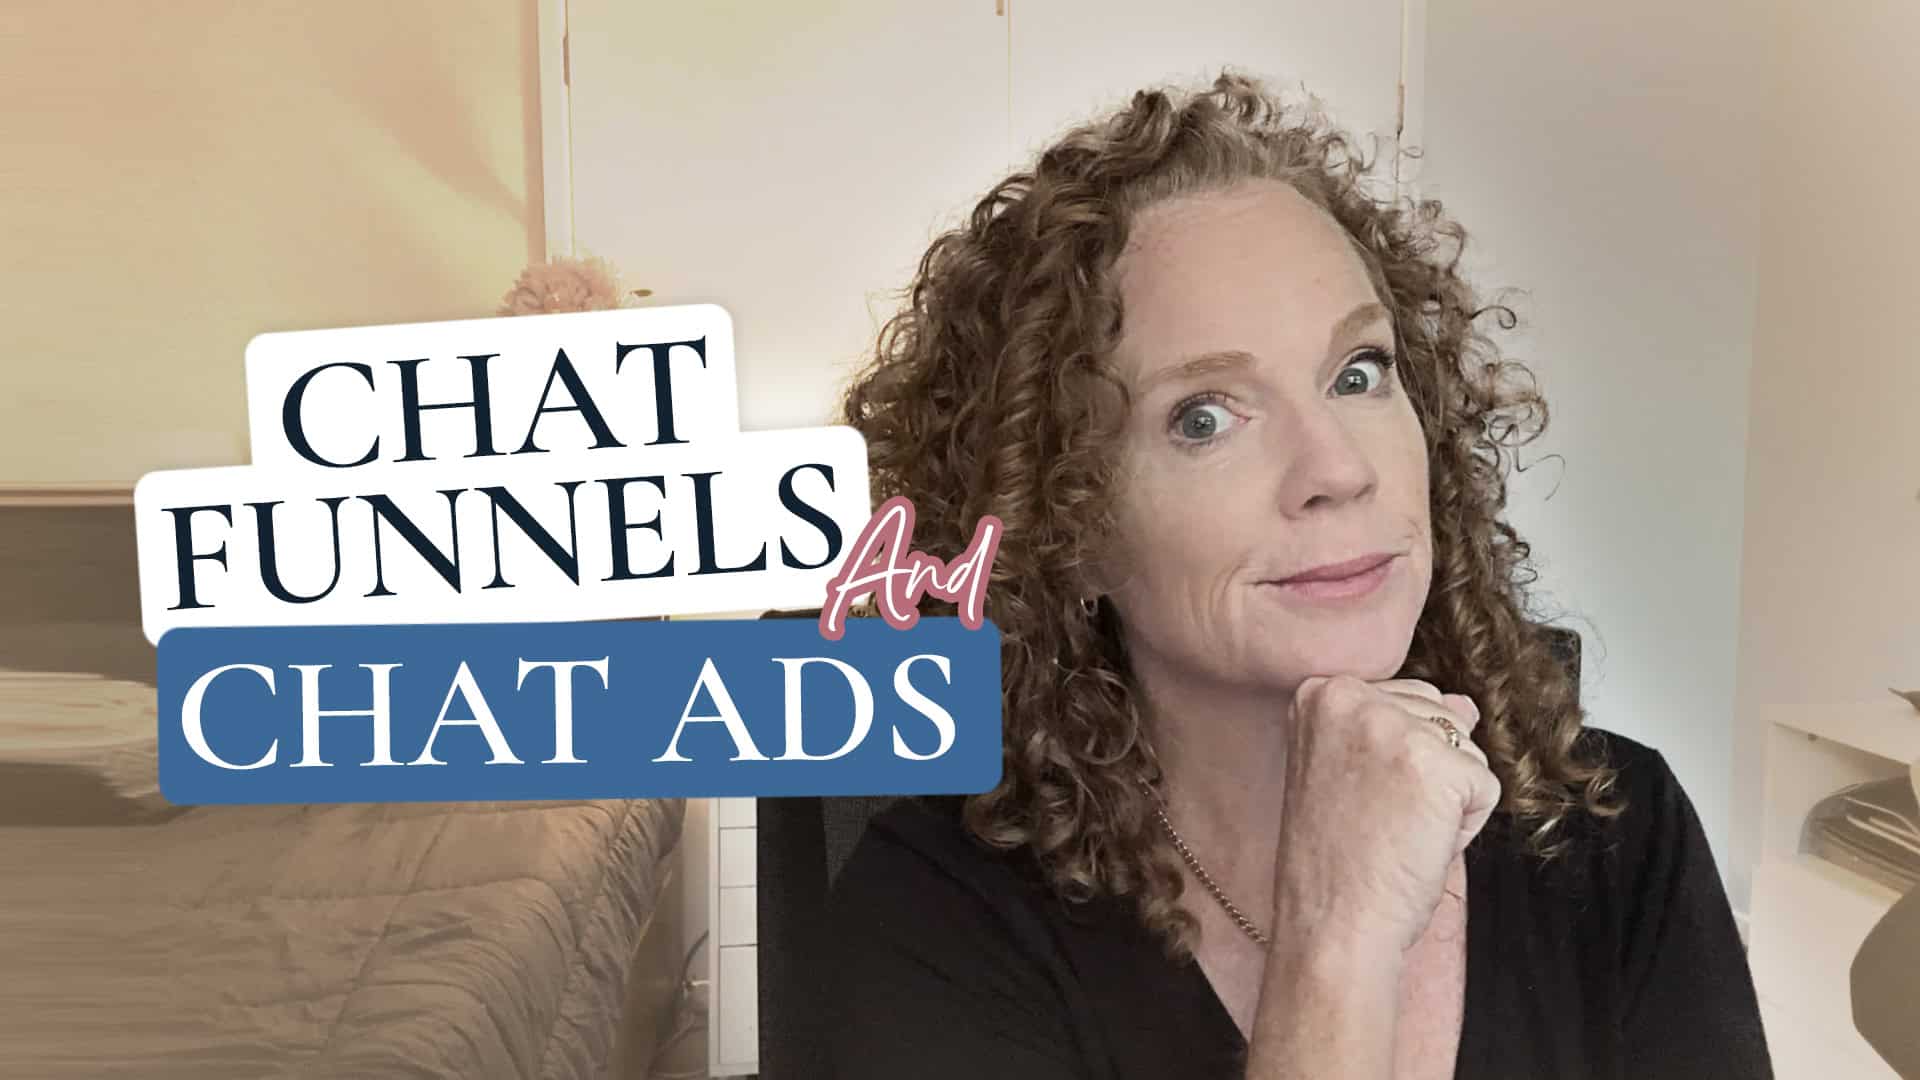 Chat Funnels and Chat Ads